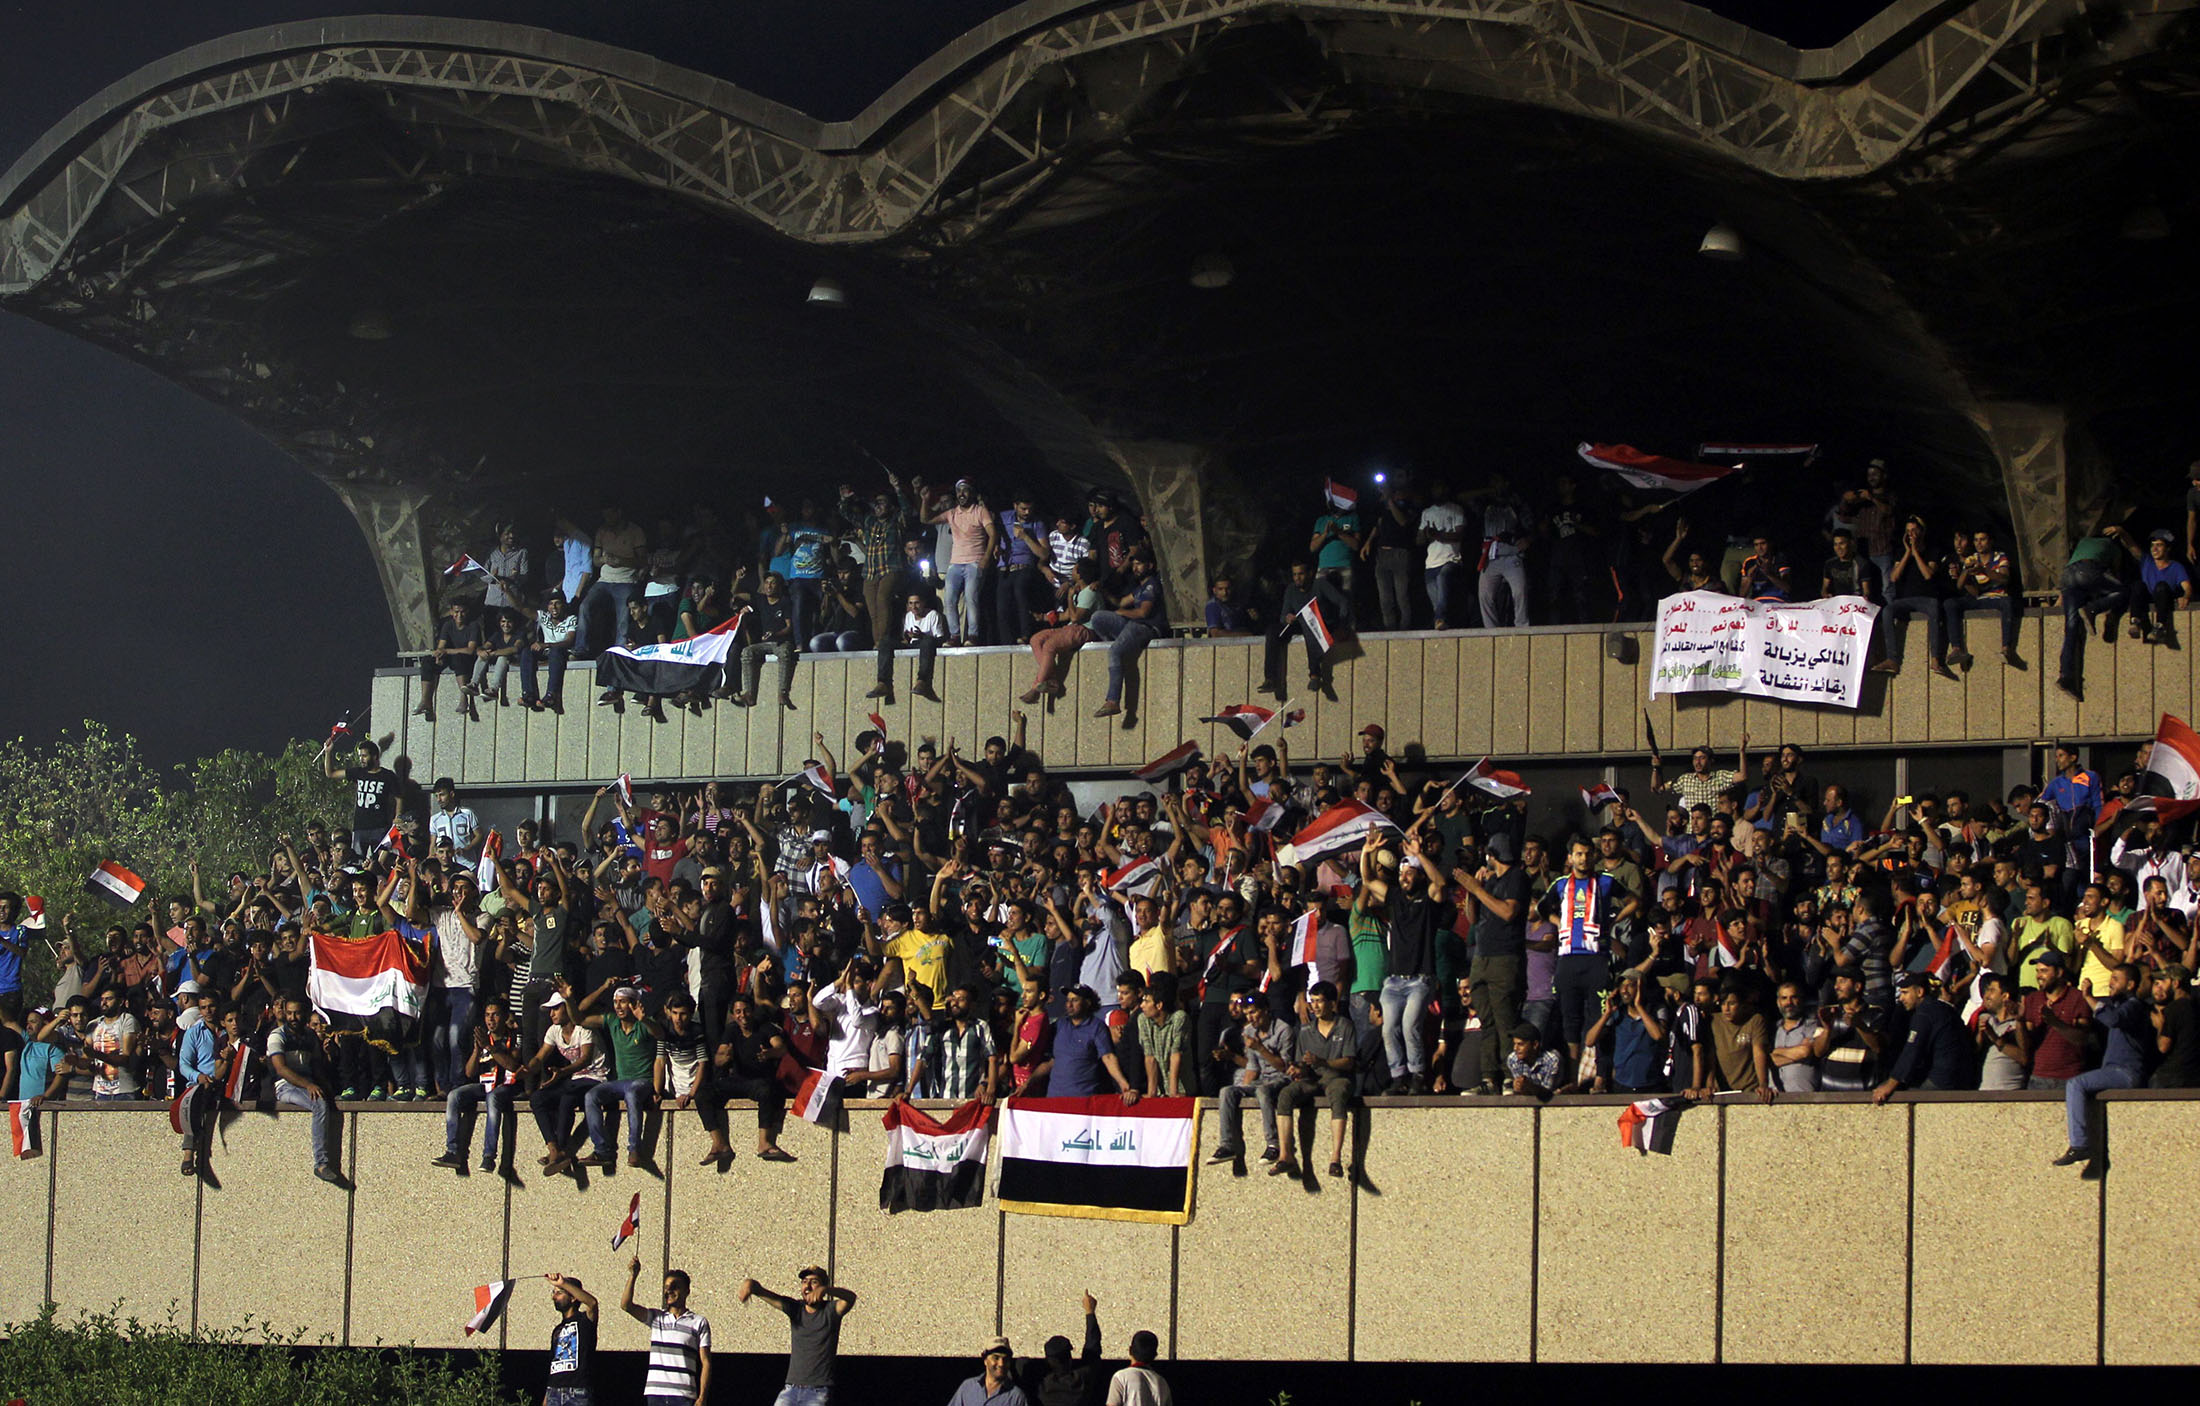 Supporters of cleric Moqtada al-Sadr gather in the courtyard of celebrations after breaking into Baghdad's heavily fortified 'Green Zone' on April 30.
